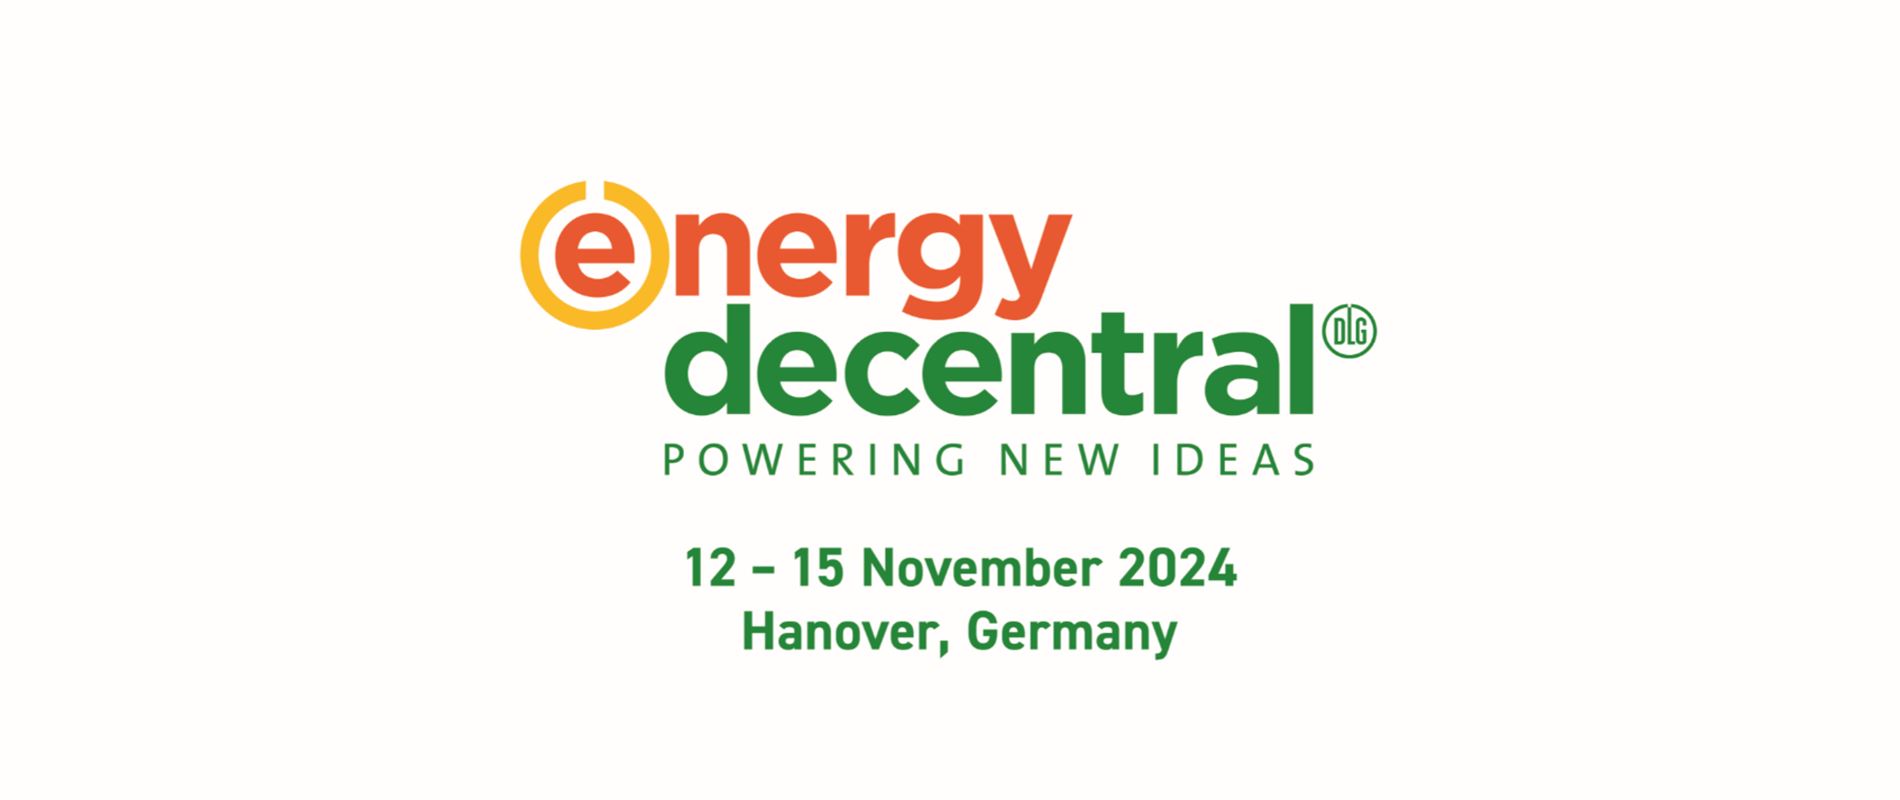 High exhibitor interest in EnergyDecentral shows the relevance of the exhibition s topics renewable energy